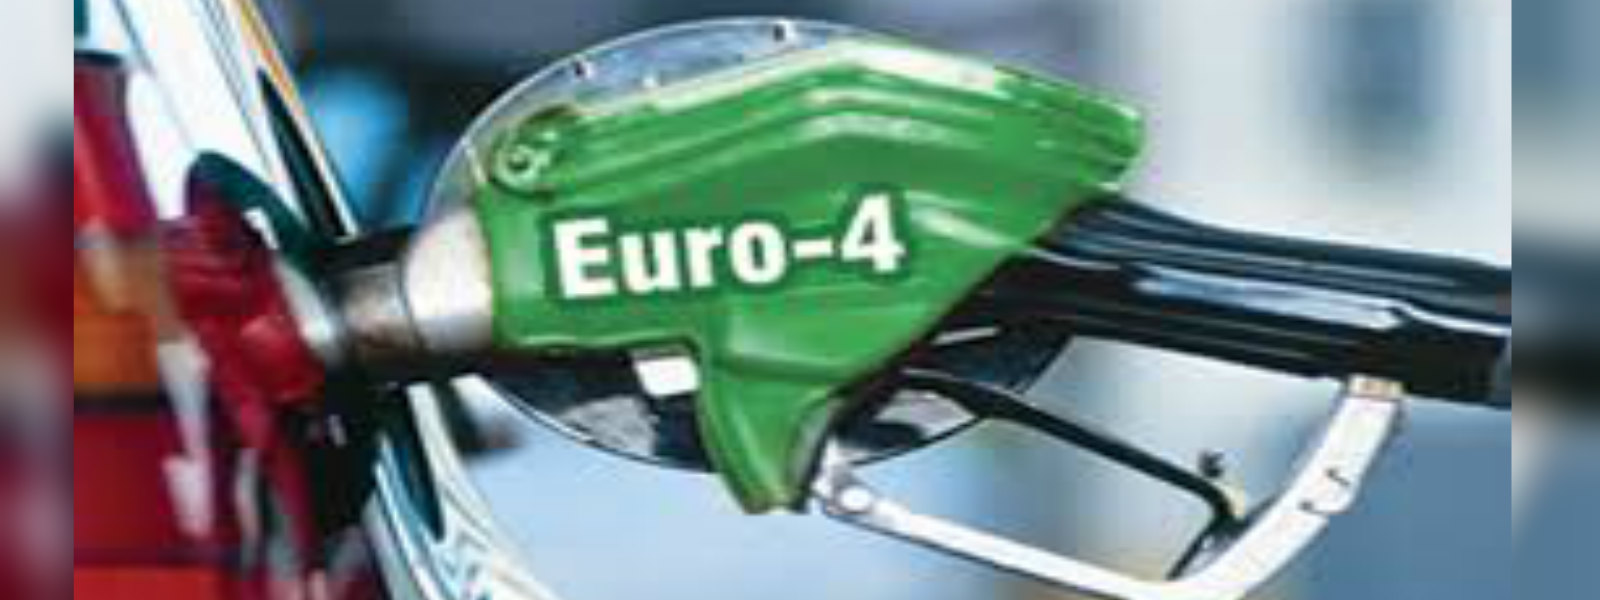 EURO 4 fuel from tomorrow